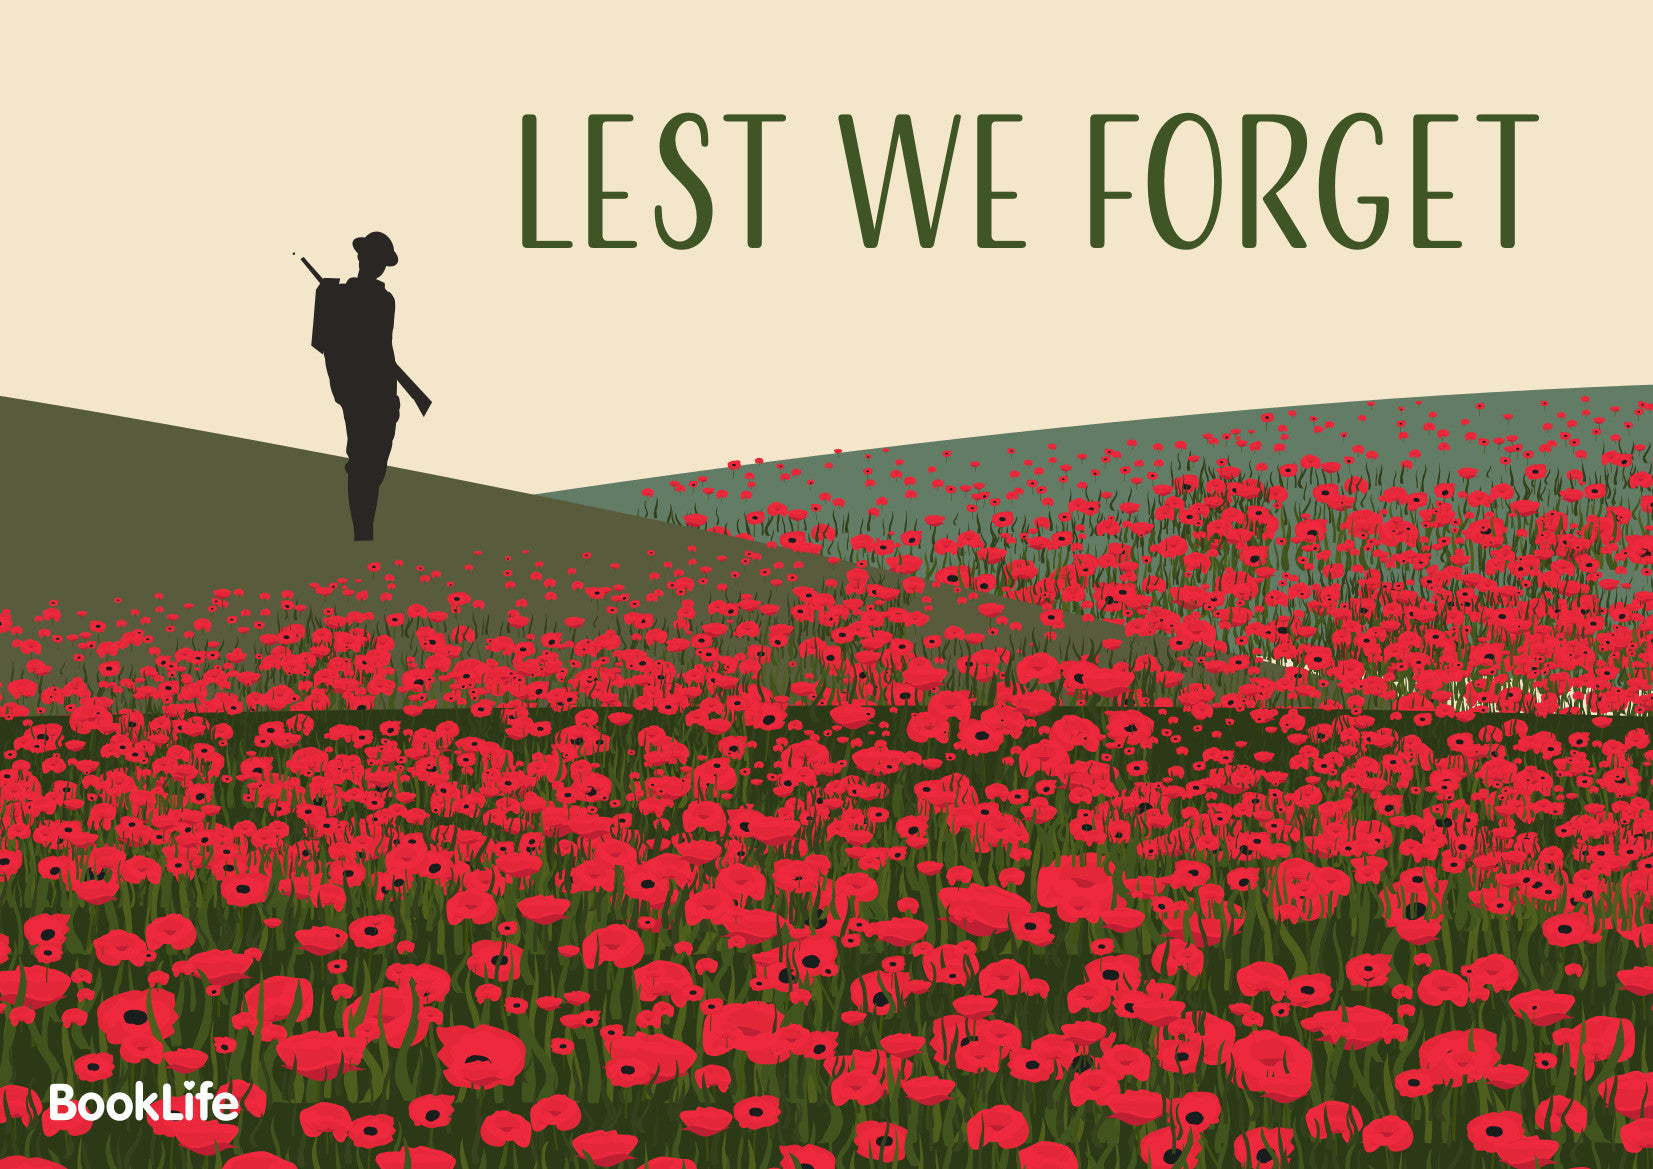 Lest We Forget Poster by BookLife